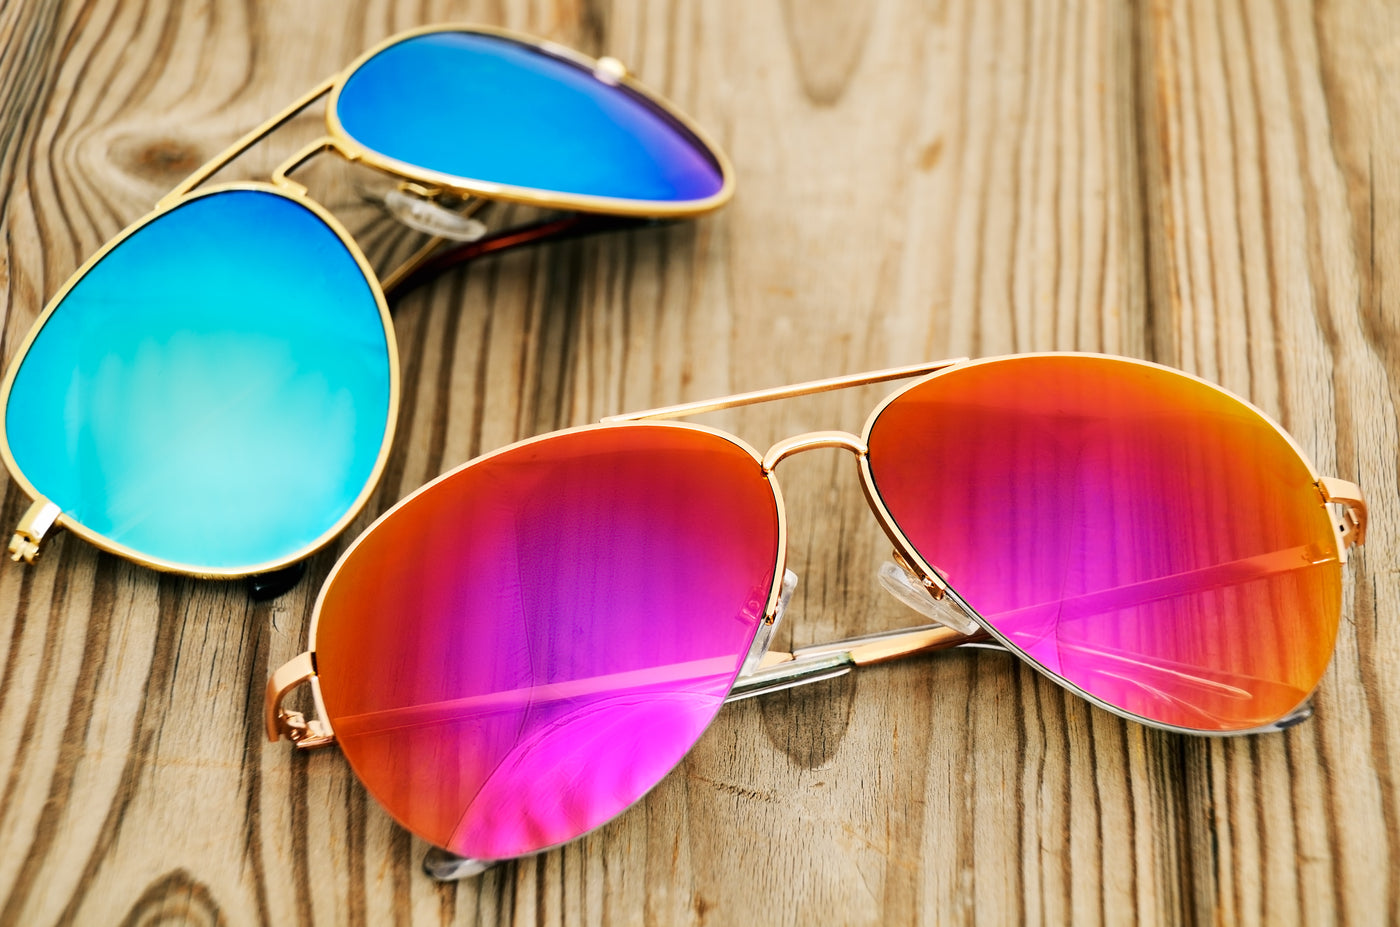 Two pair of gold metal sunglasses one with blue polarized lenses and one with pink polarized lenses